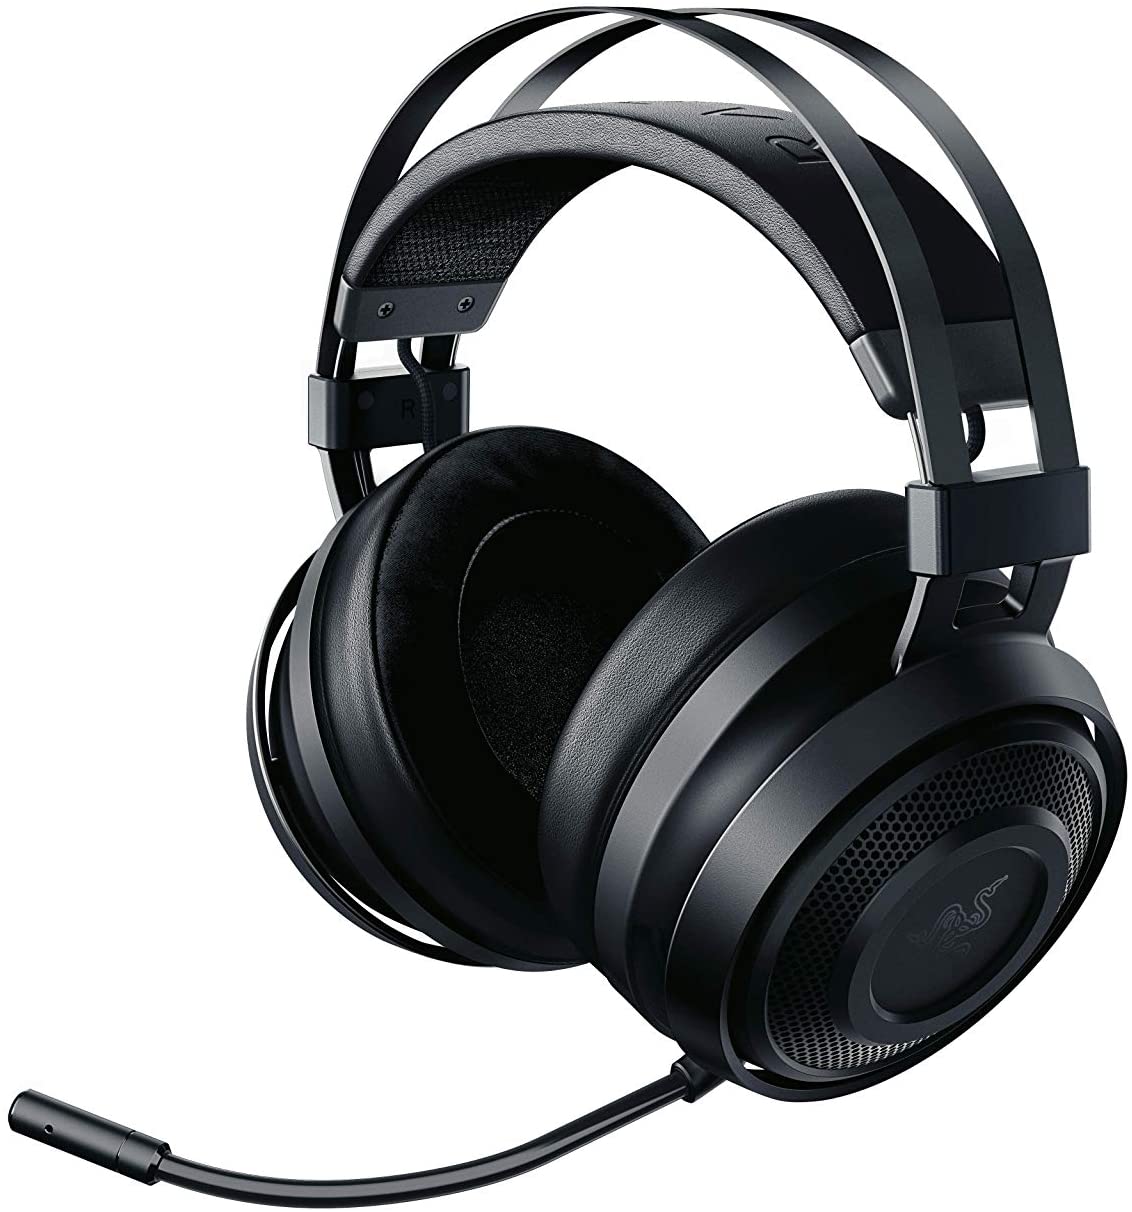 Razer Headset Nari Essential, 2.4 GHz wireless frequency, up to 16 hours wirelessly with a long battery life, RAZ-02690100